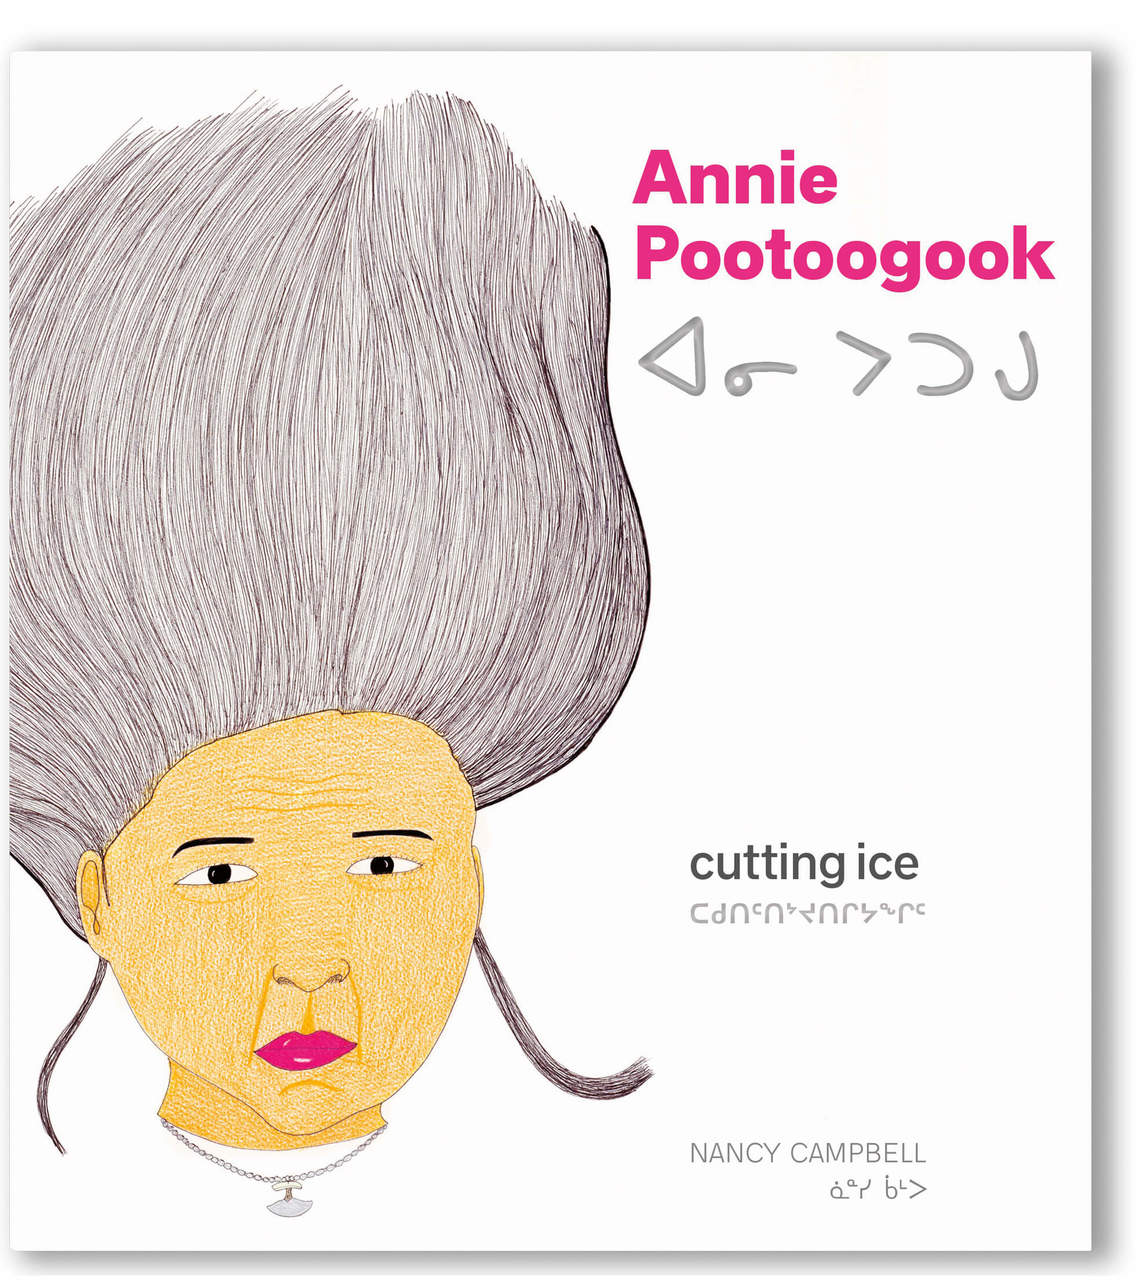 Cover of Annie Pootoogook: Cutting Ice, 2017, by Nancy Campbell